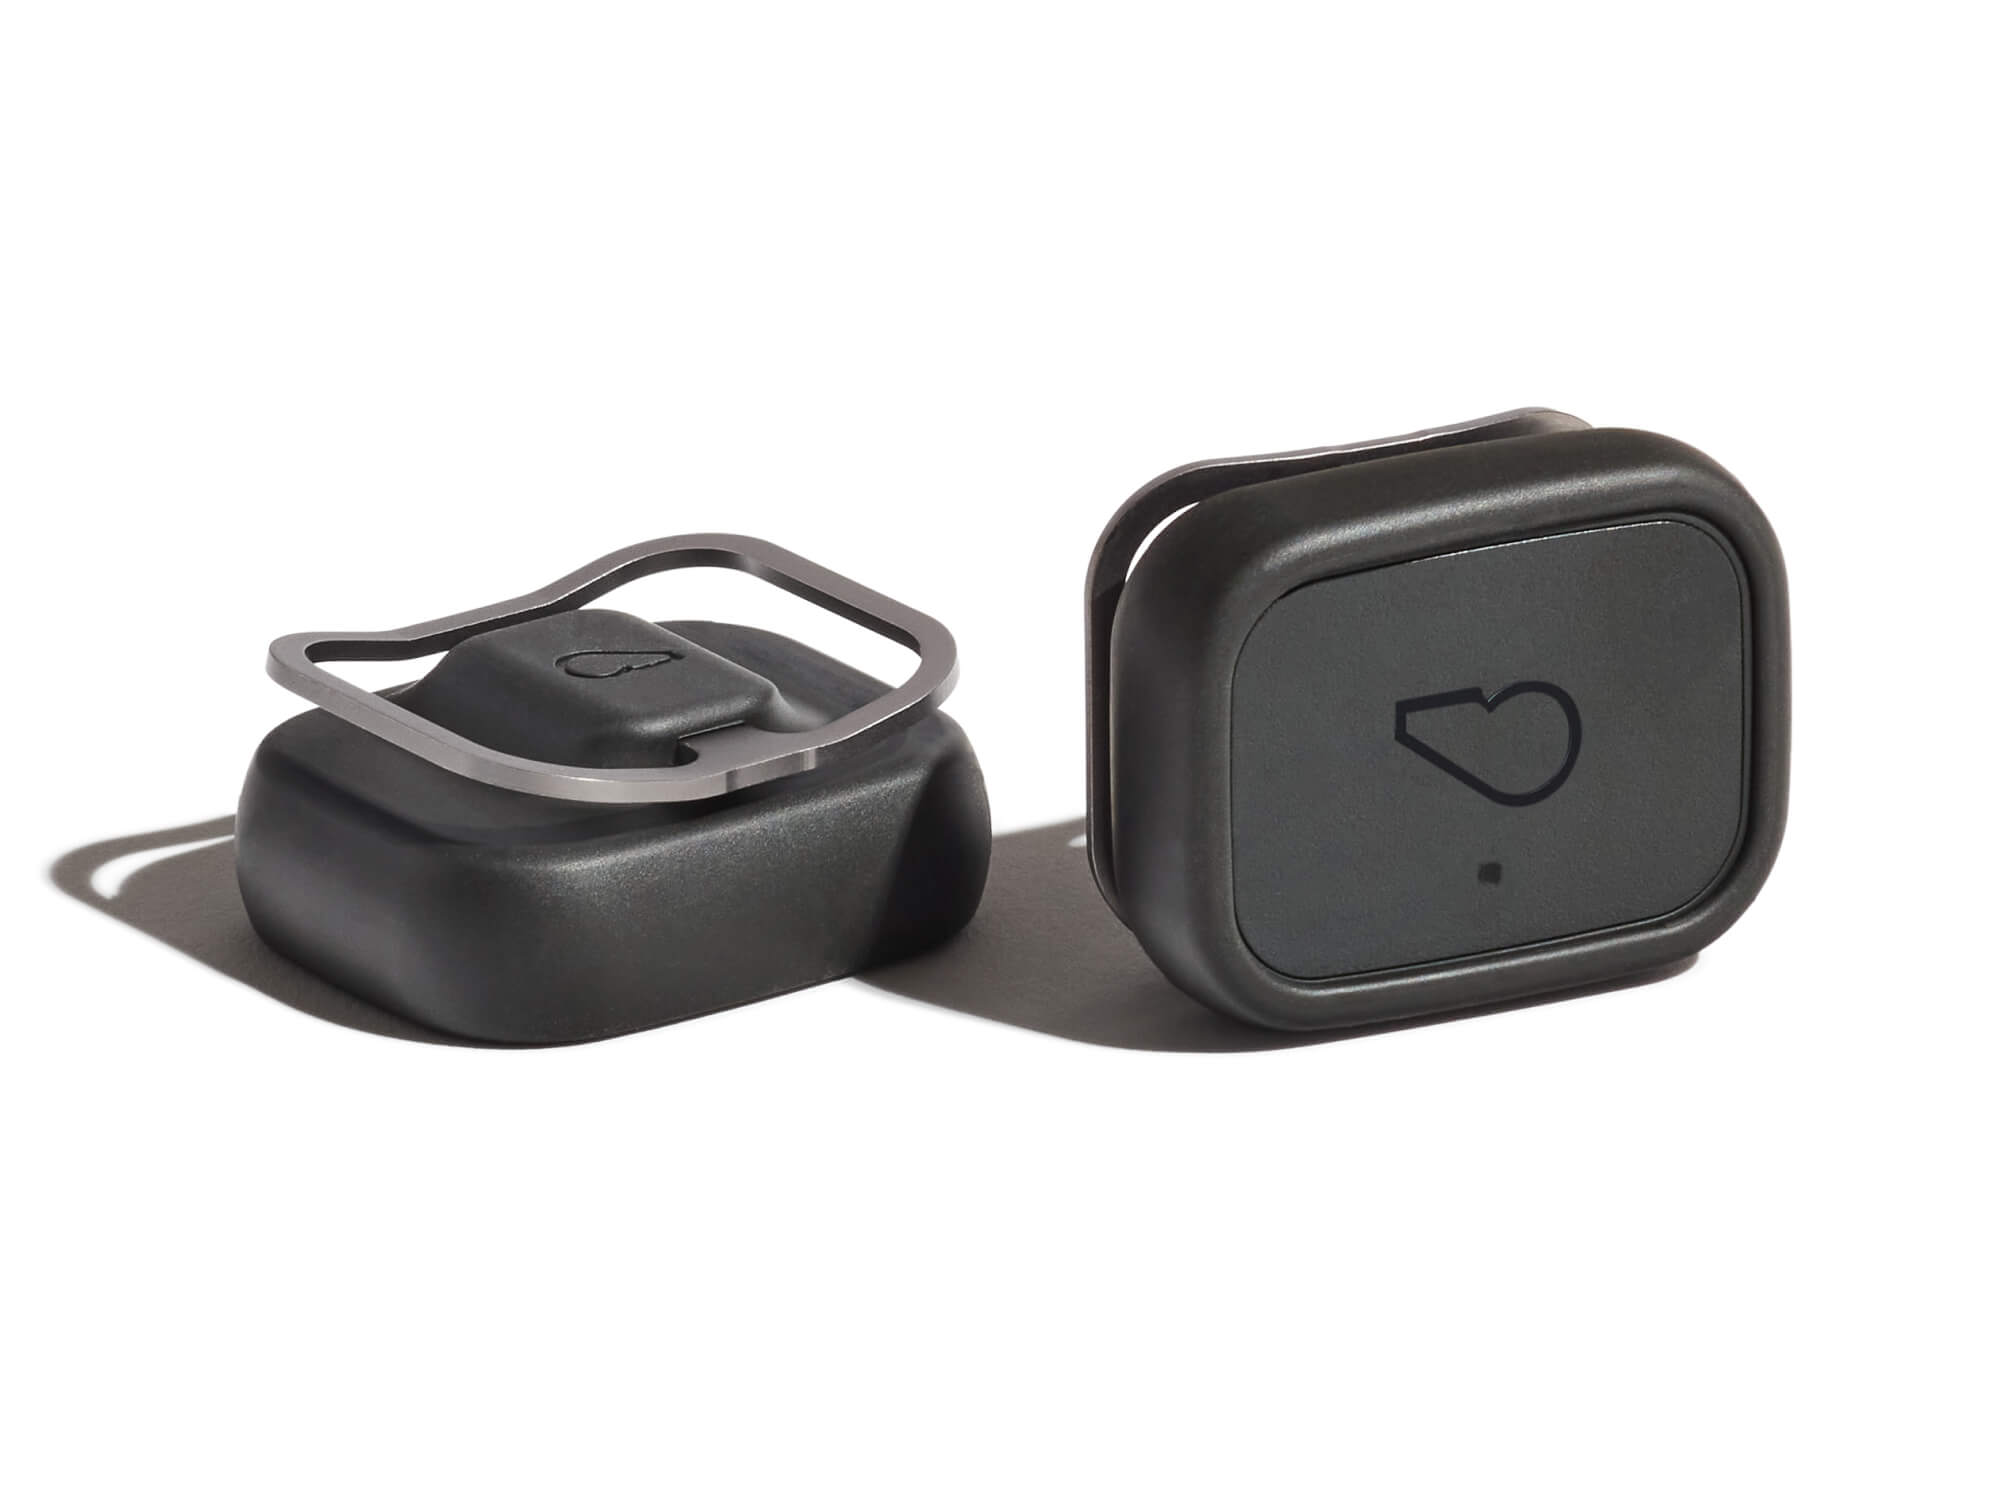 Whistle Health 2.0 Smart Device 